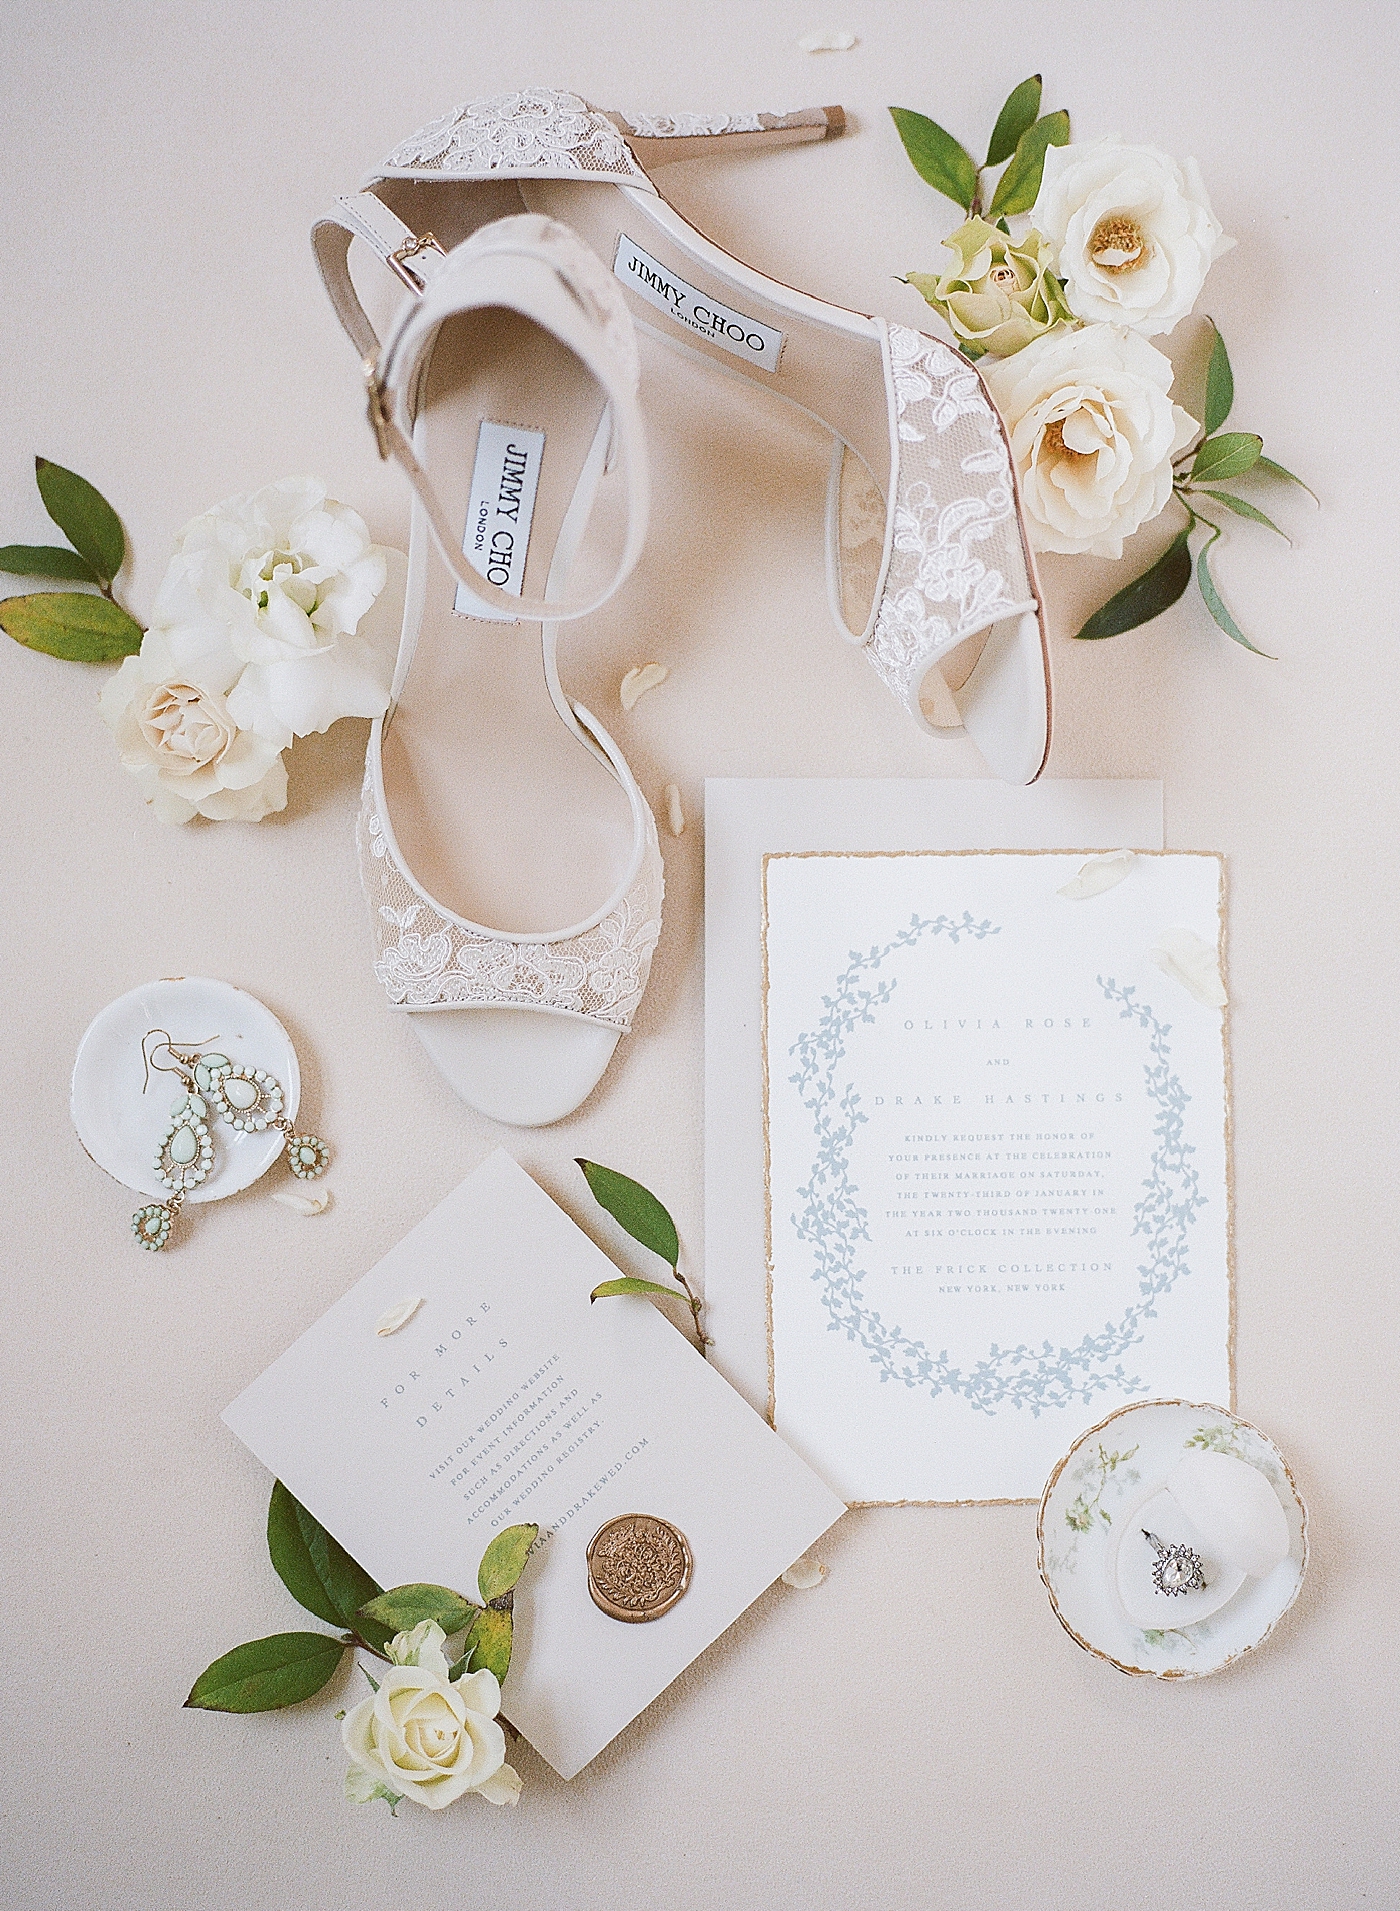 Bridal shoes styled with florals during Old World Romance Editorial | Photo by Hope Helmuth Photograpghy